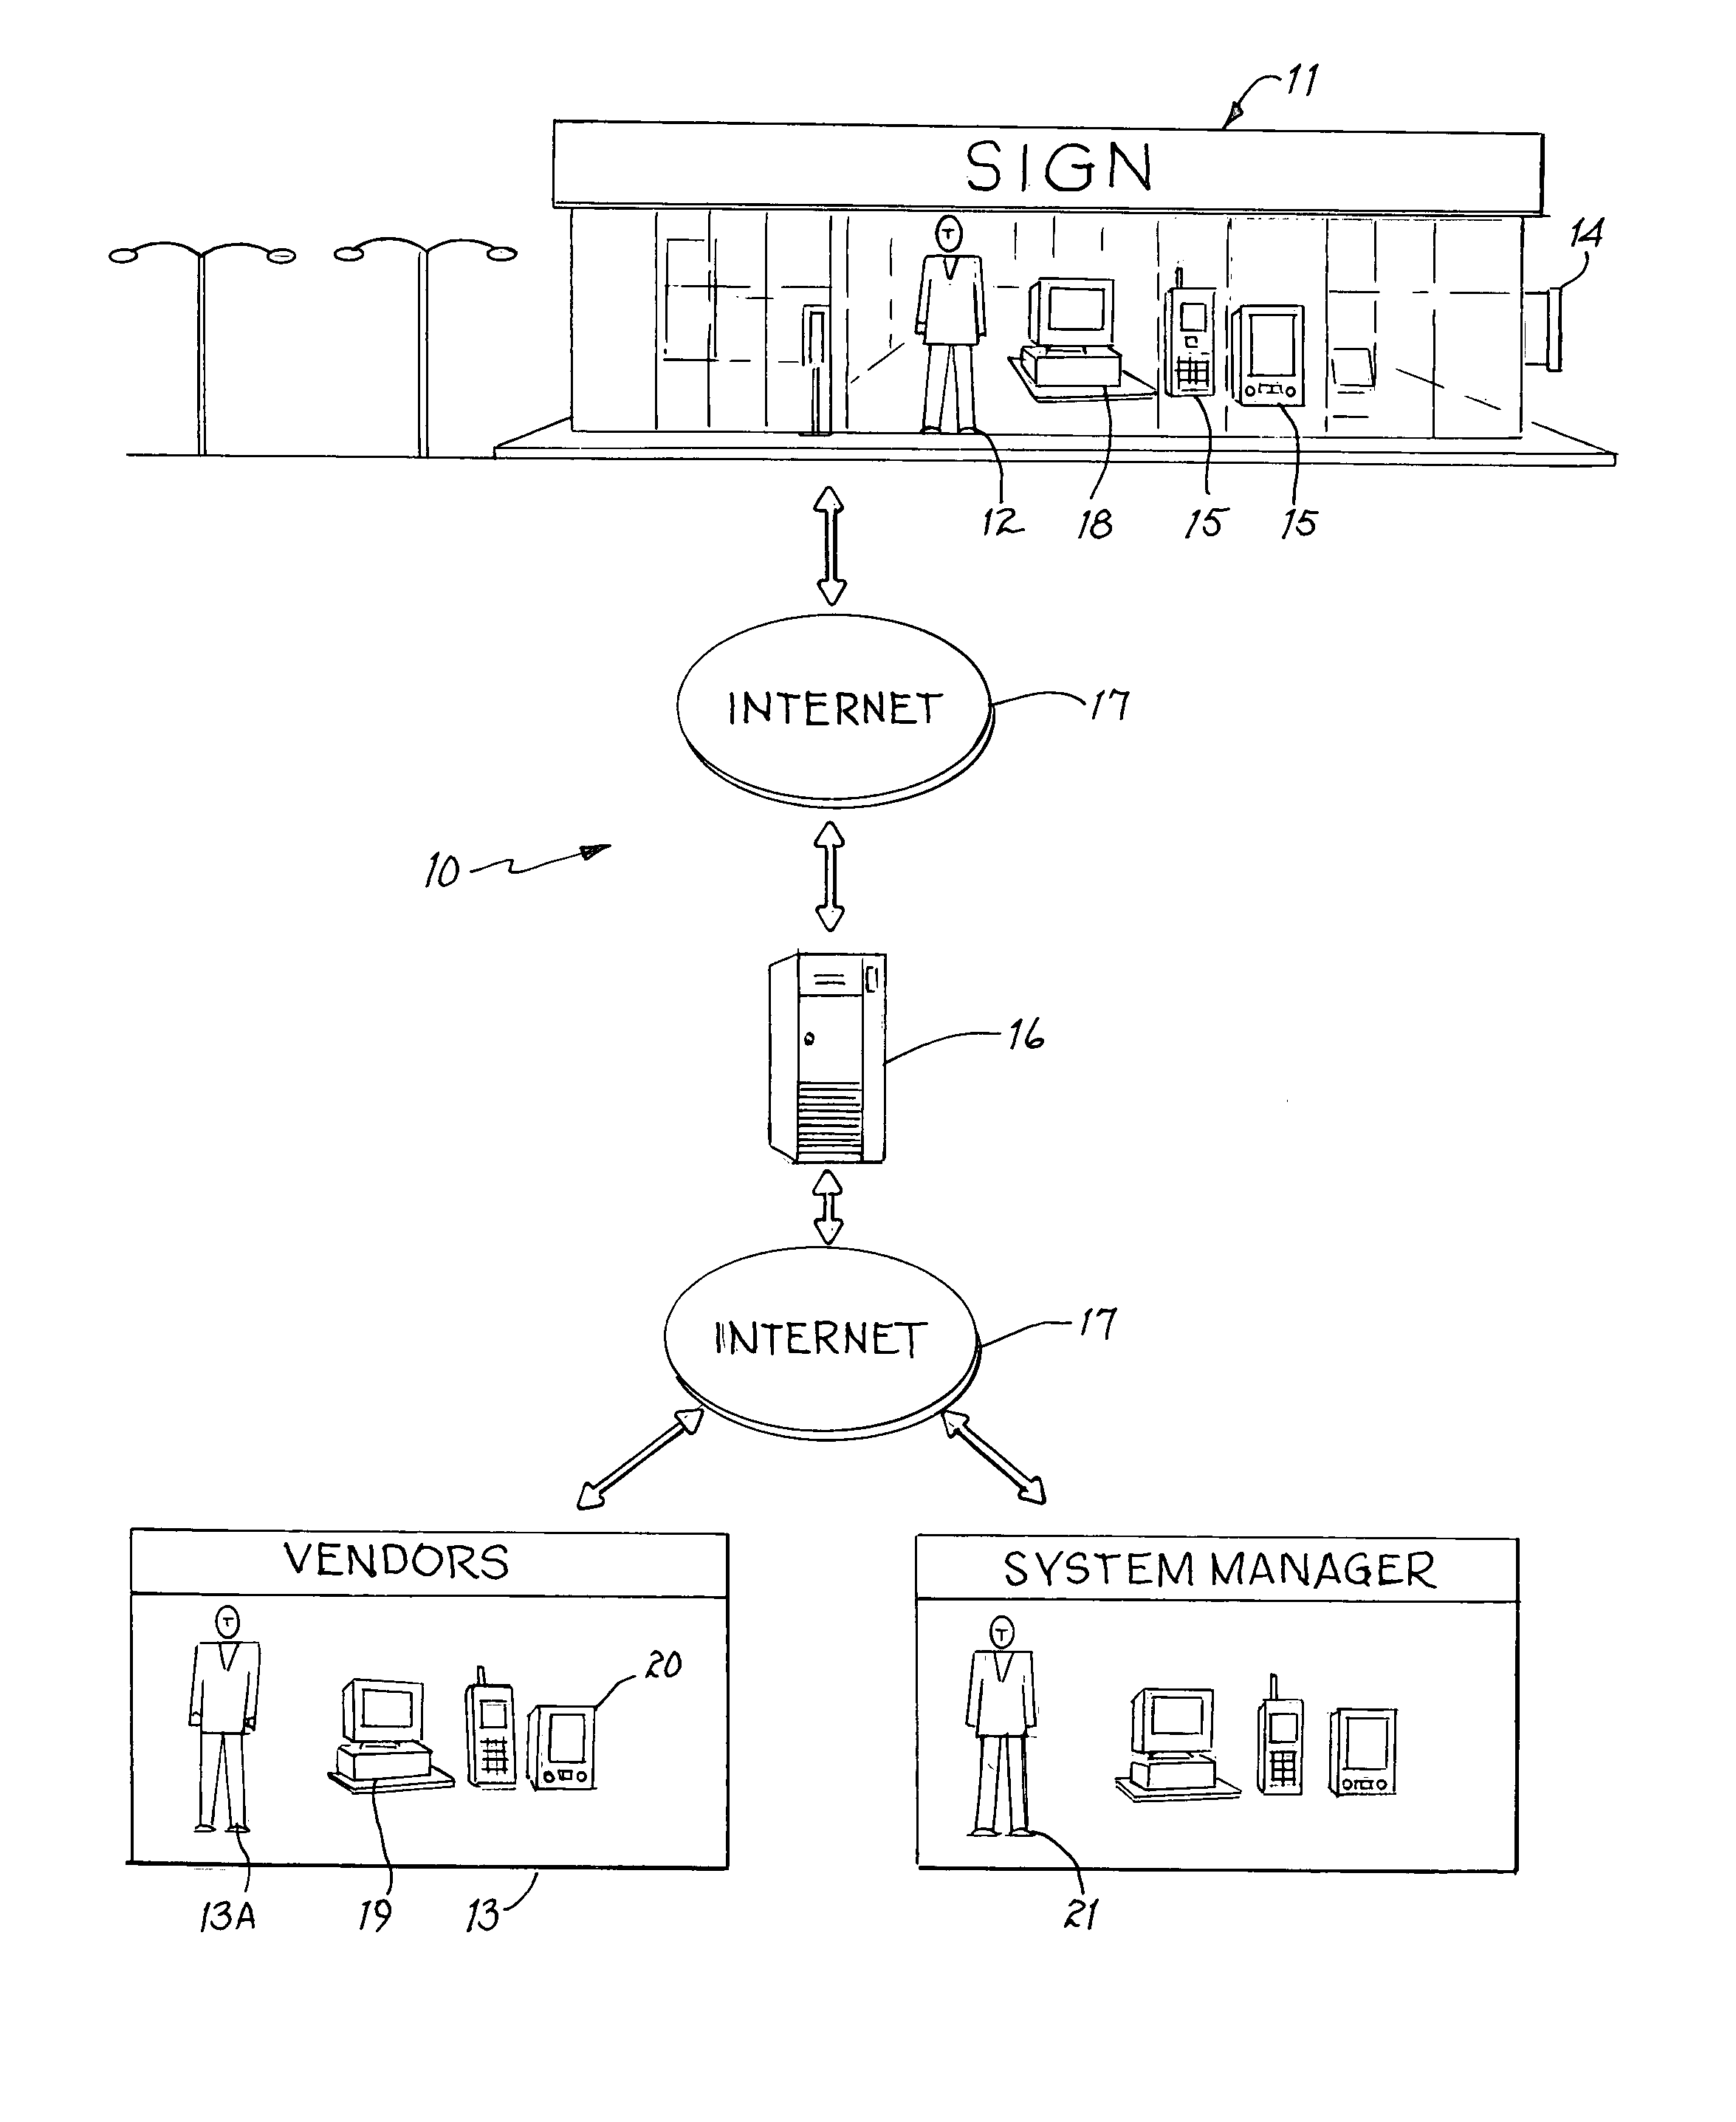 Communication system for electrical maintenance management of different facilities and method therefor